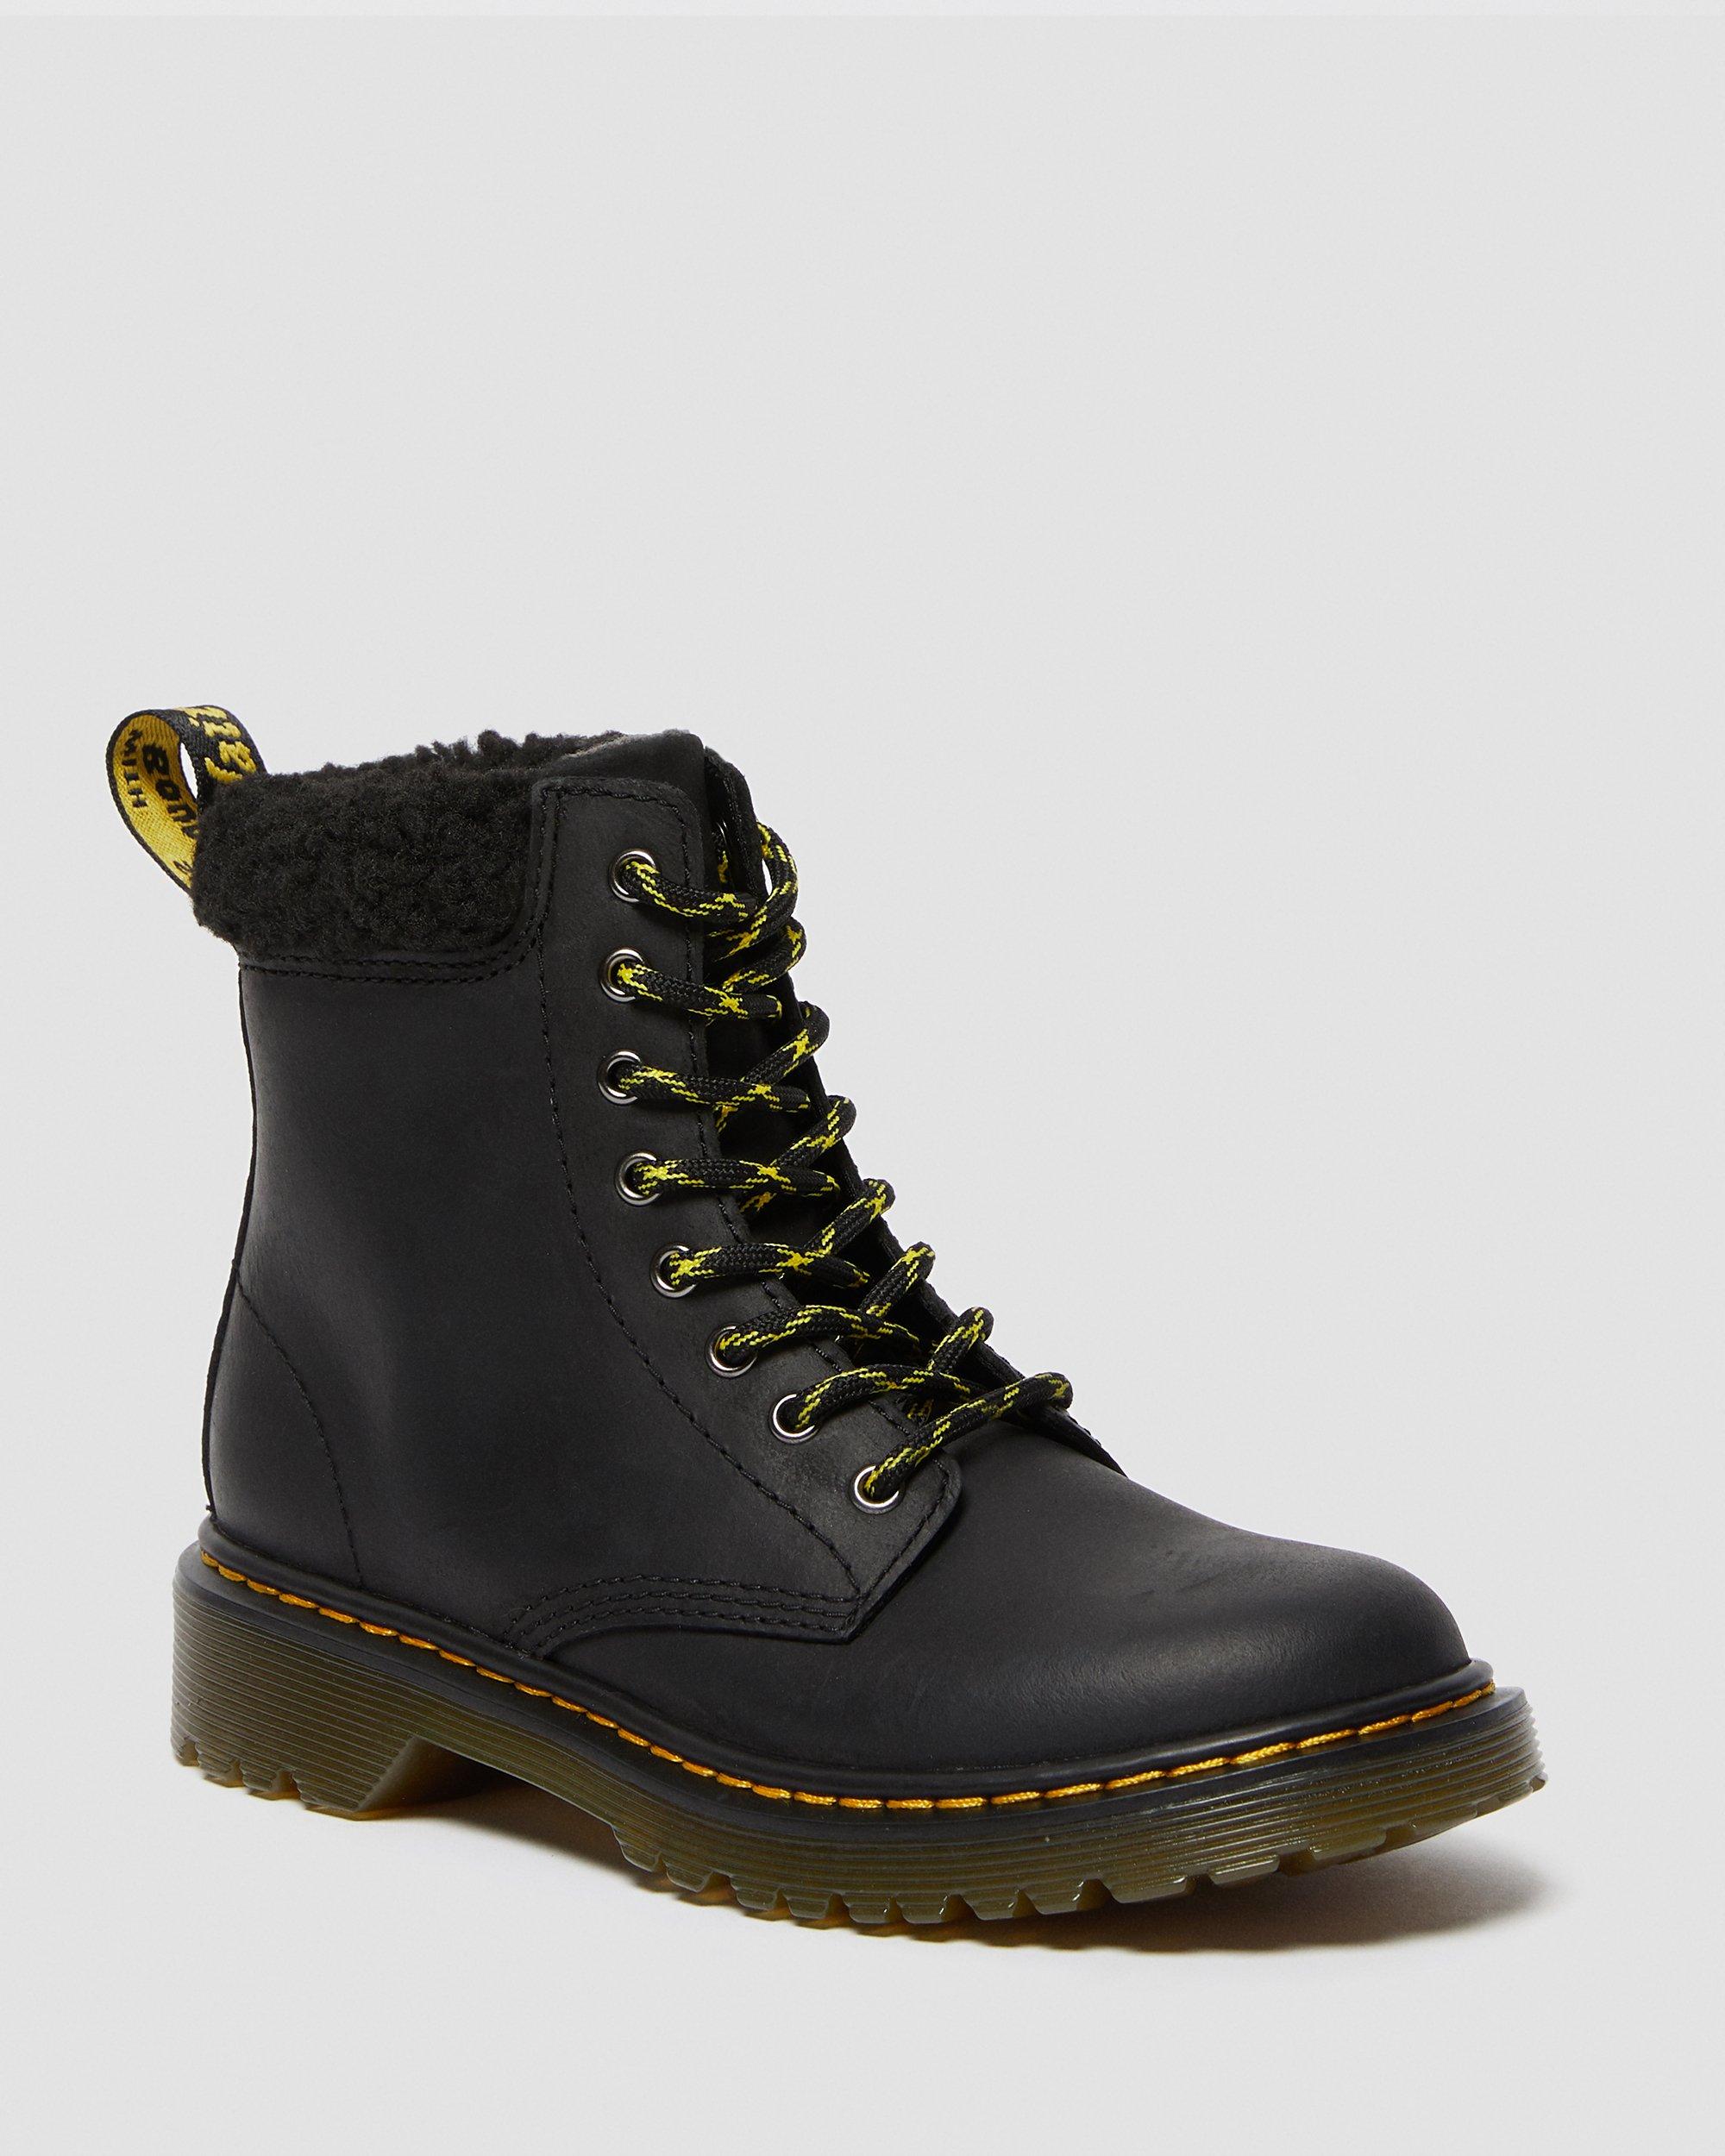 dr martens youth size 3